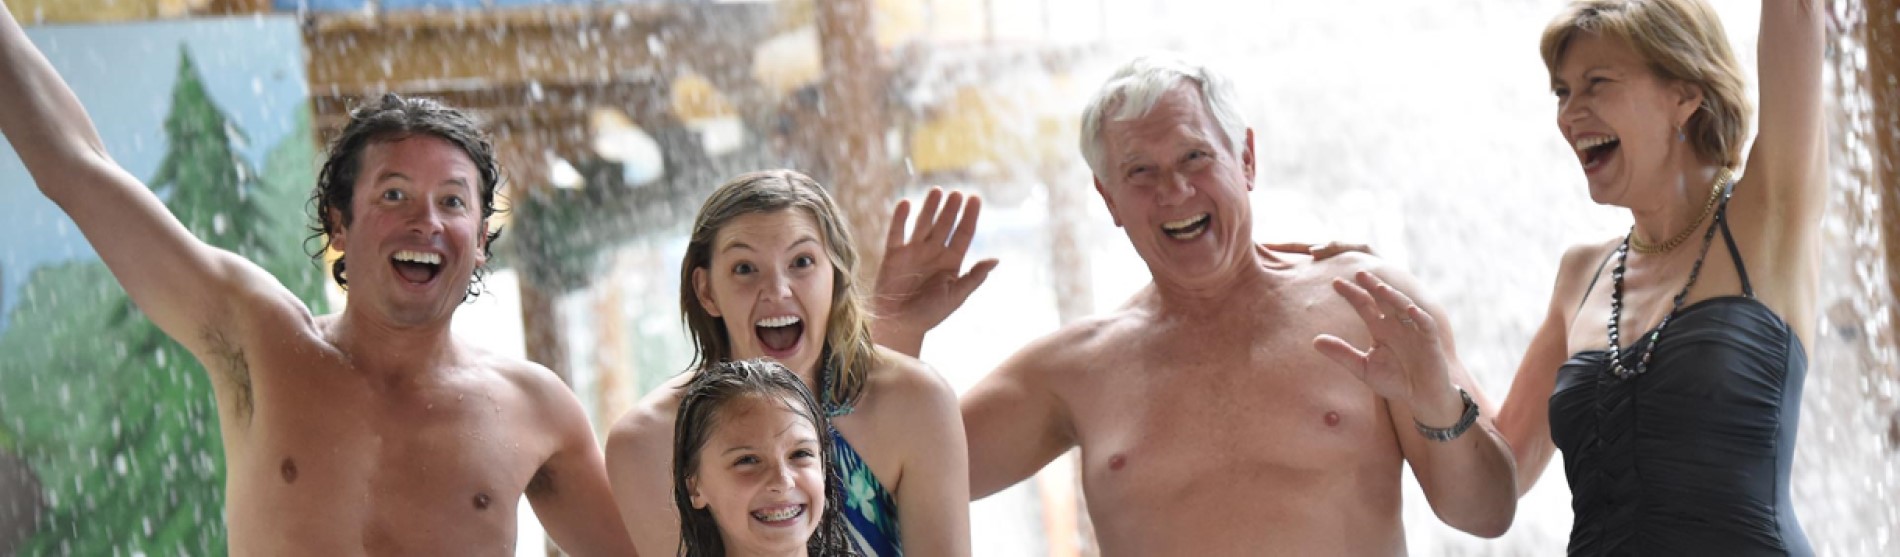 Family pose for a picture at a water park